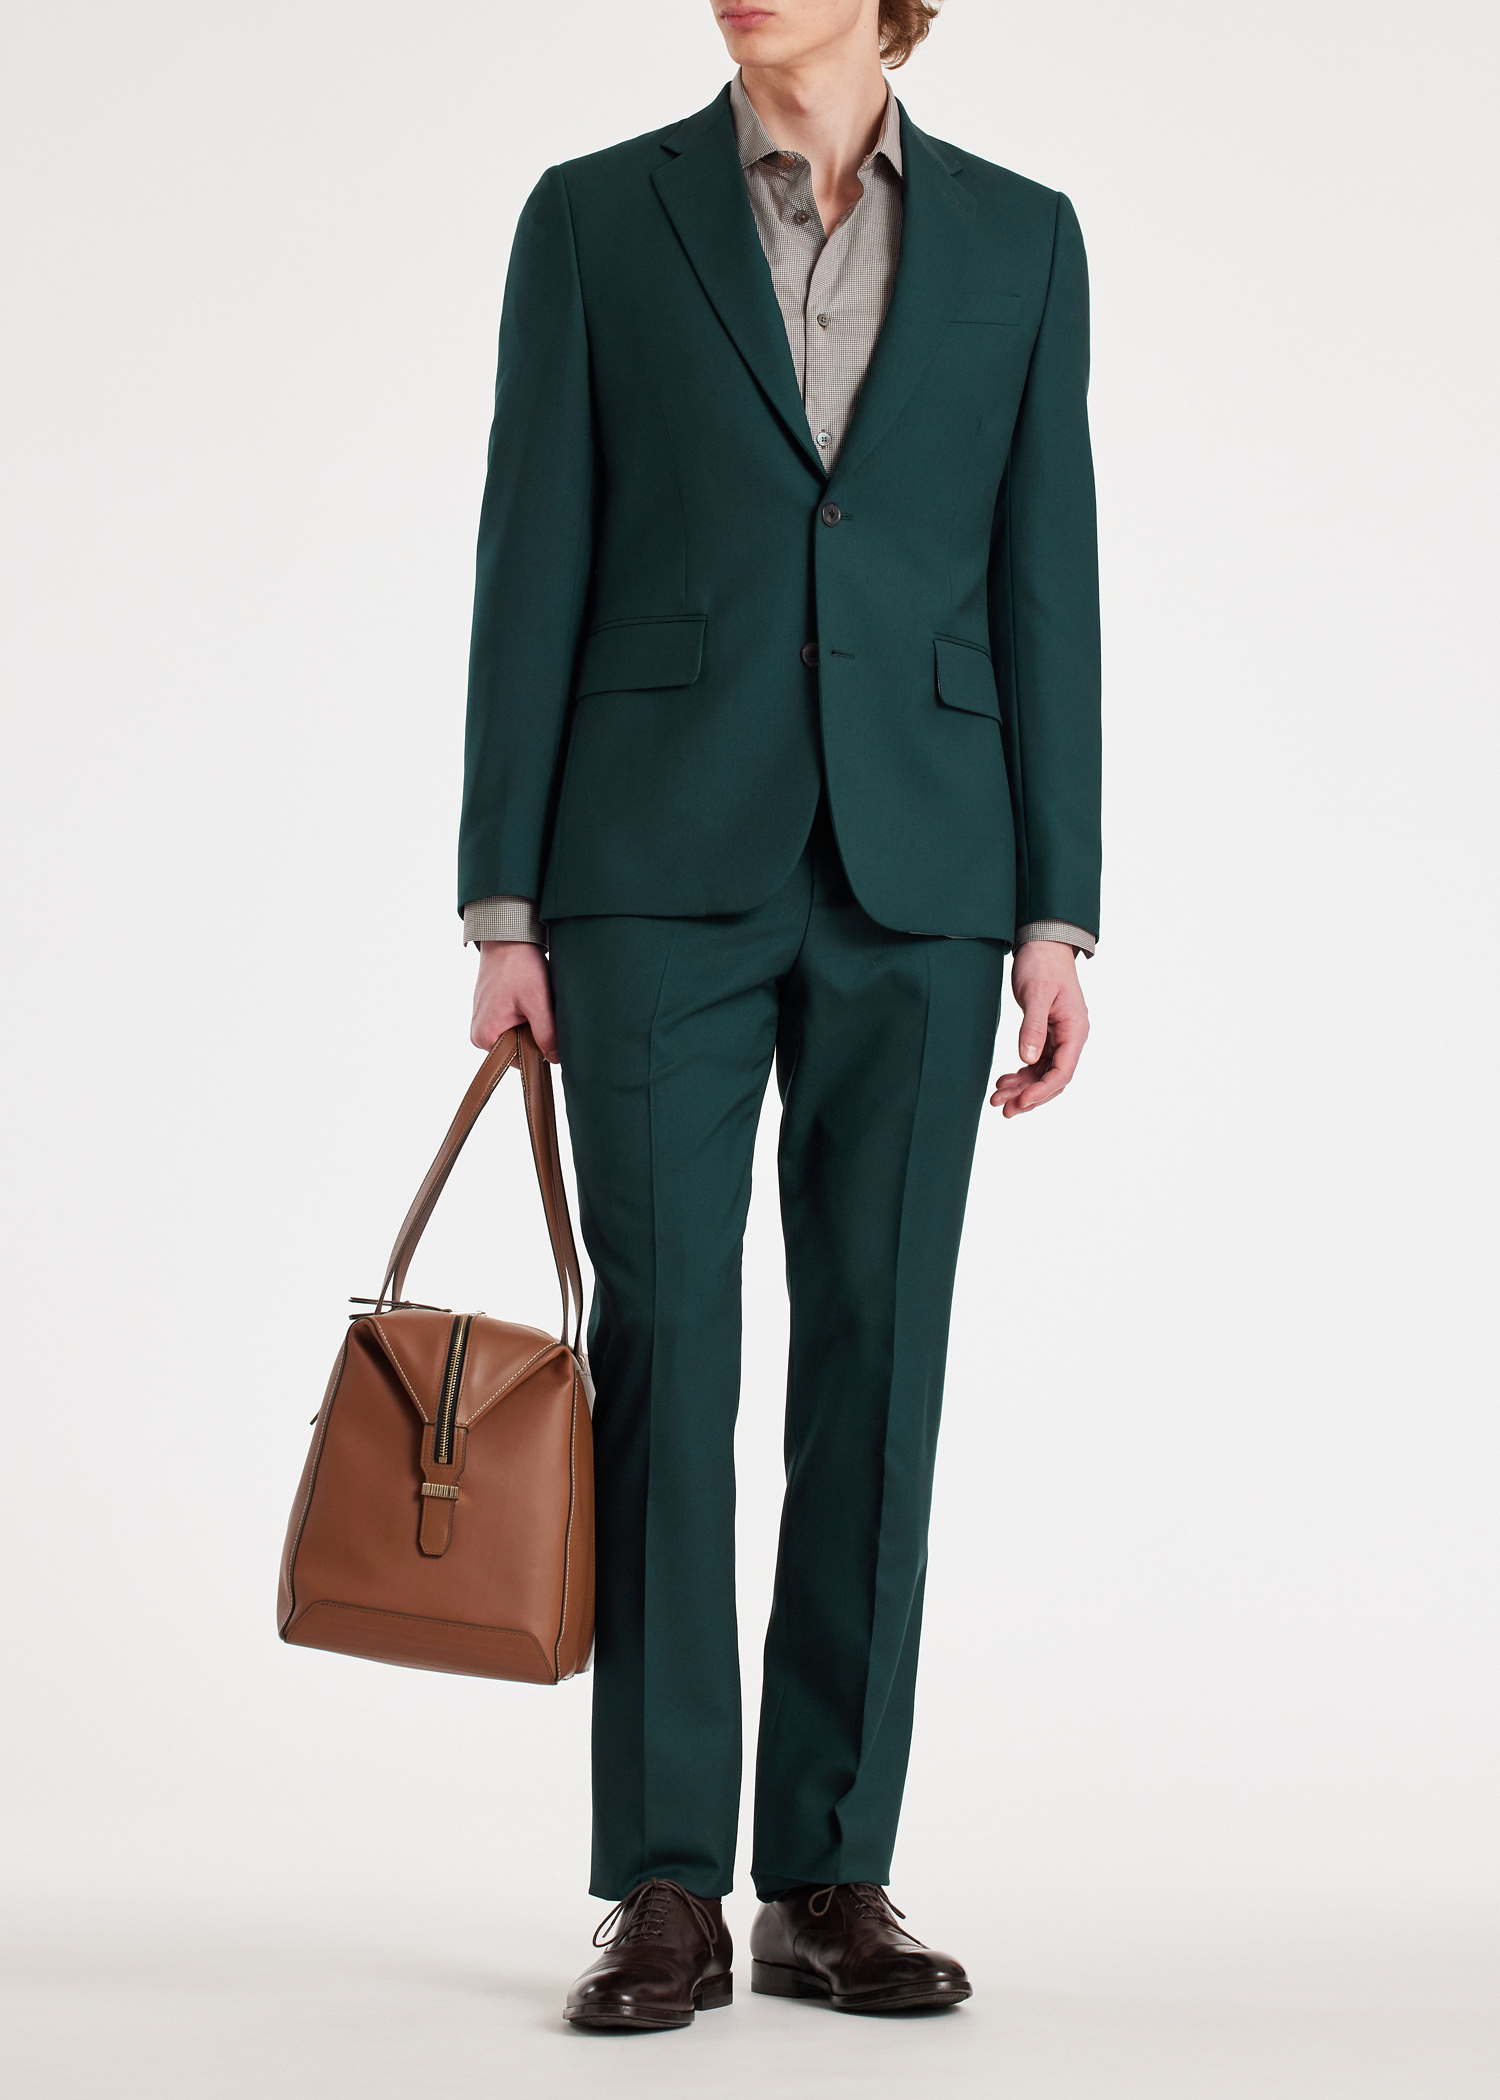 The Brierley - Dark Green Wool 'A Suit To Travel In'